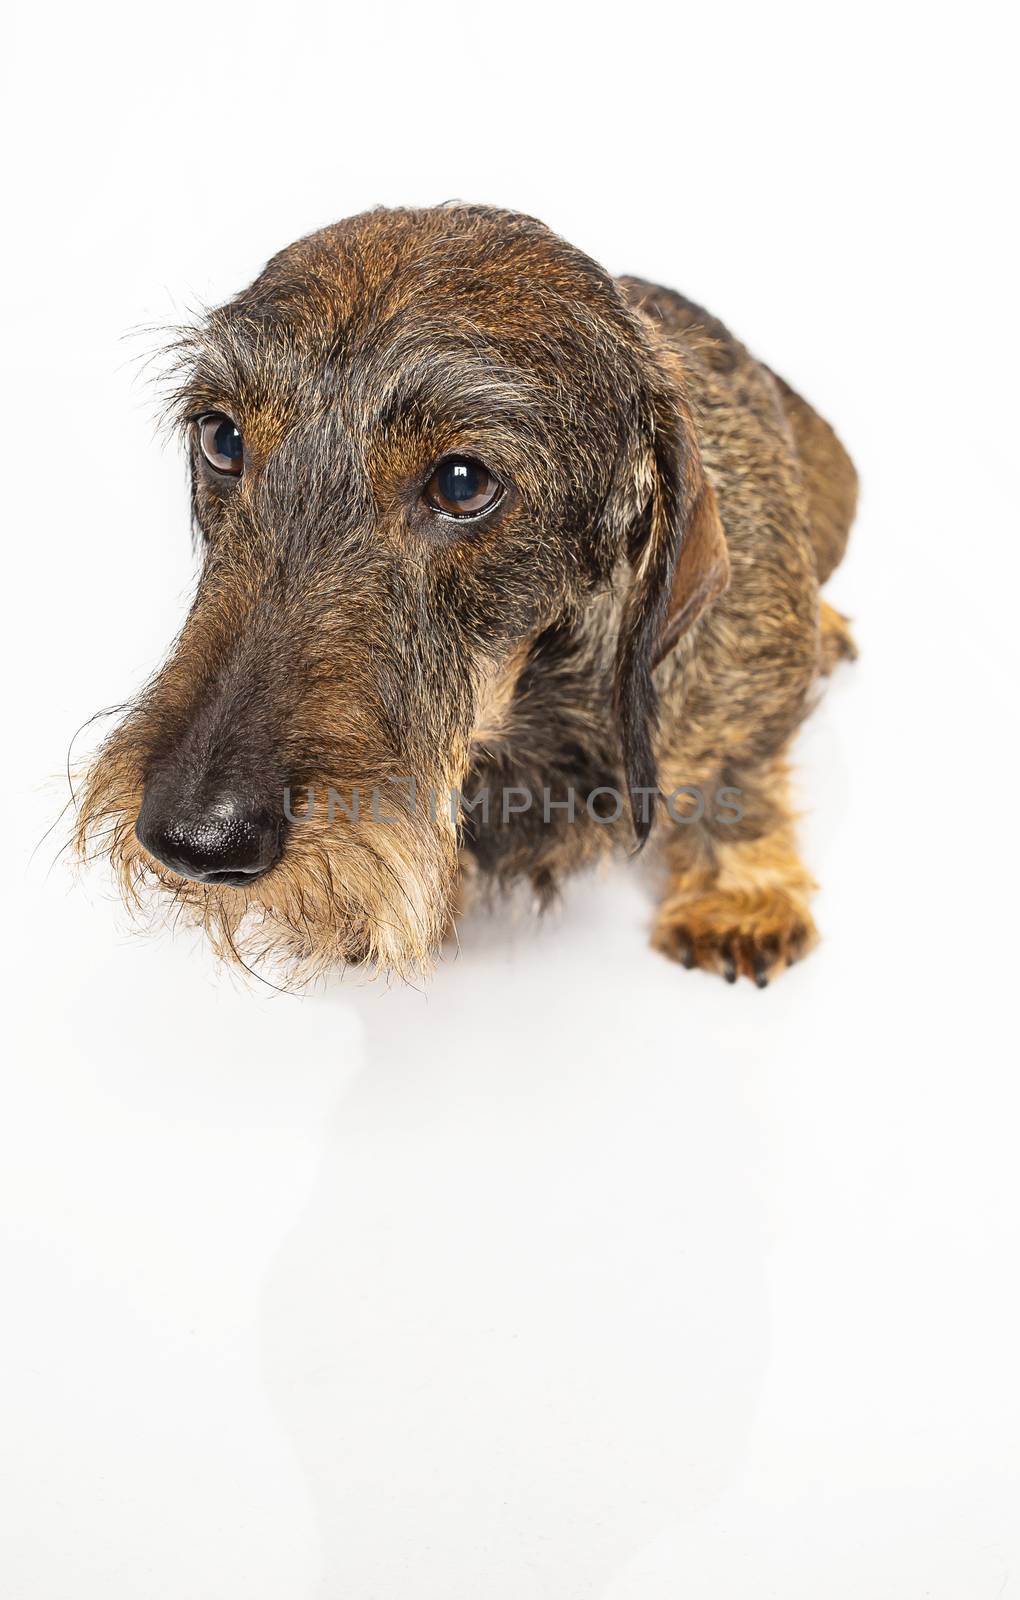 Wiener dog with a sad expression isolated on white background